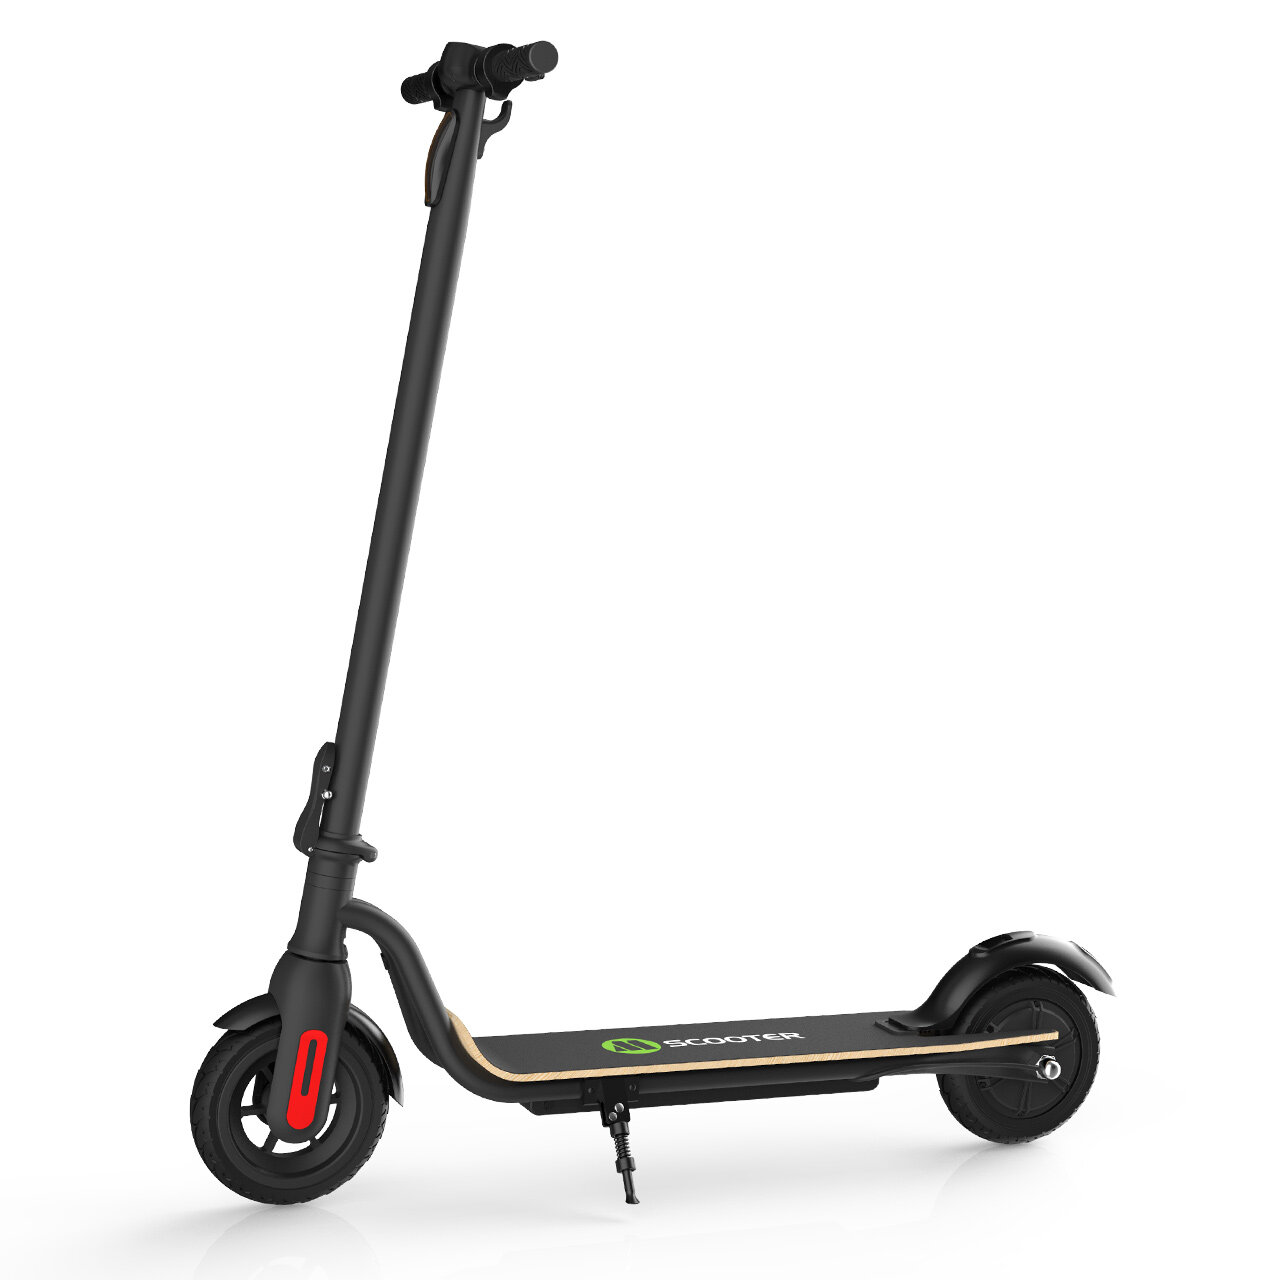 [US Direct] MEGAWHEELS S10 36V 7.5Ah 250W 8in Folding Electric Scooter 3 Speed Modes 25km/h Top Speed 17-22km Range E Sc